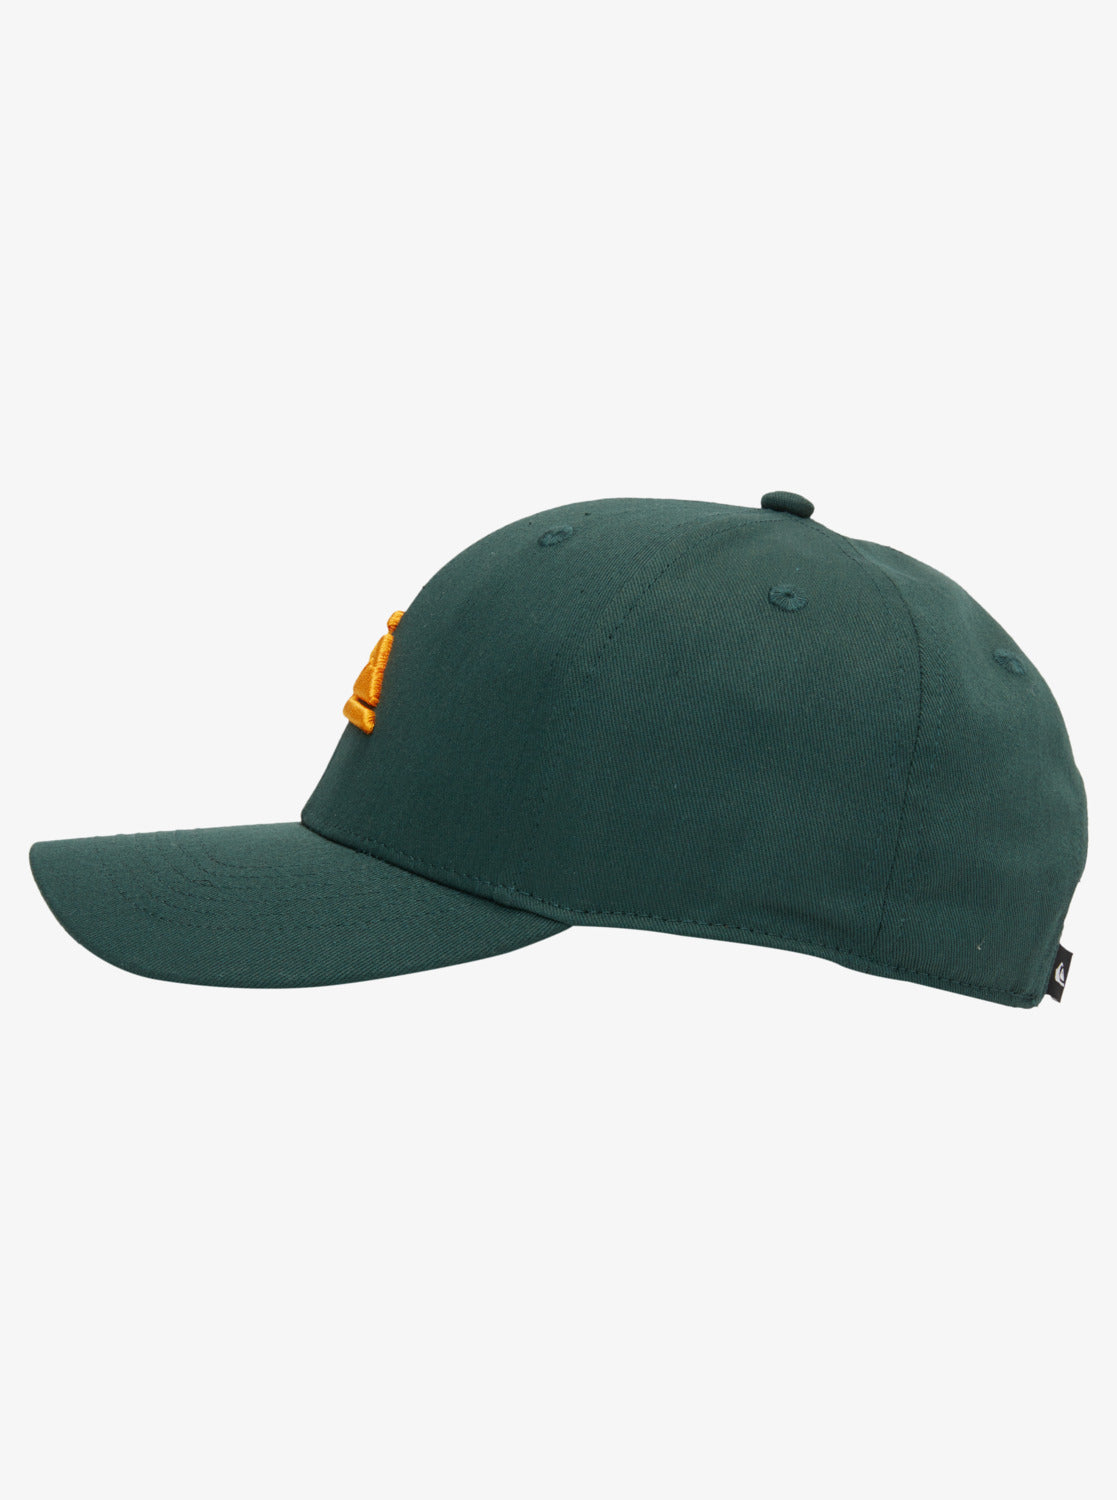 Quiksilver Decades Snapback Boys Cap in Forest